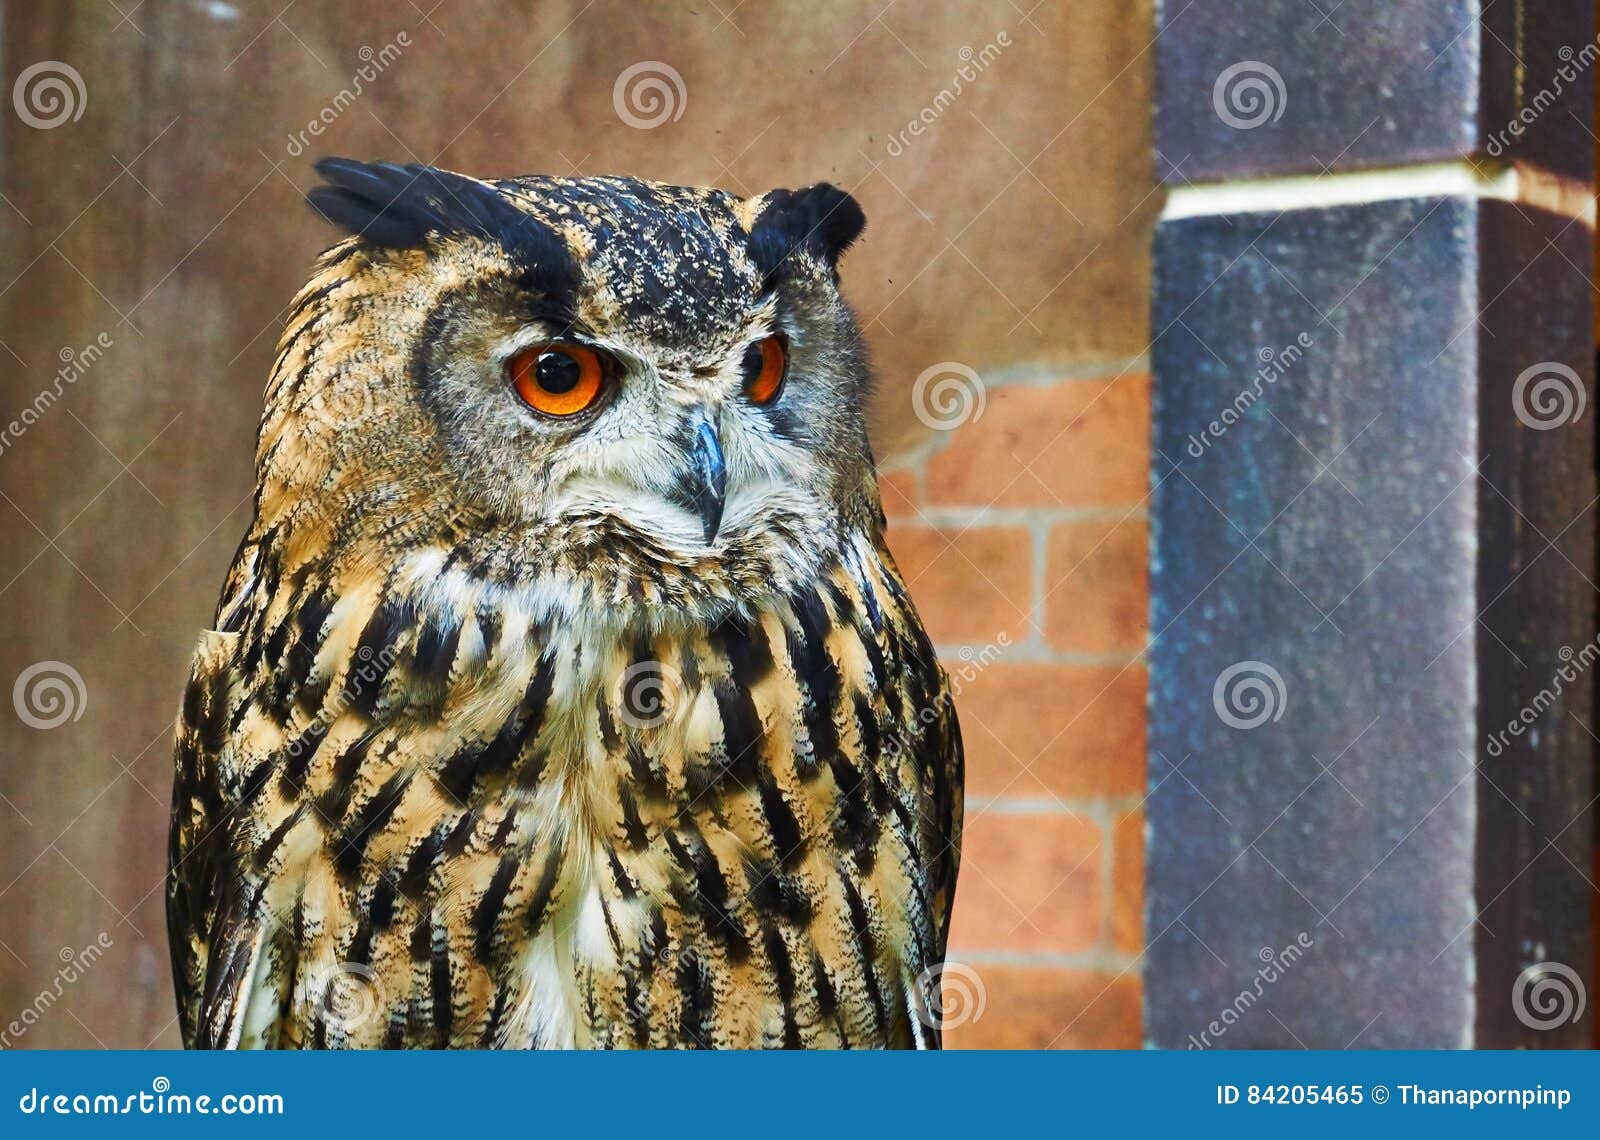 Close up picture of owl stock image. Image of wildlife - 84205465